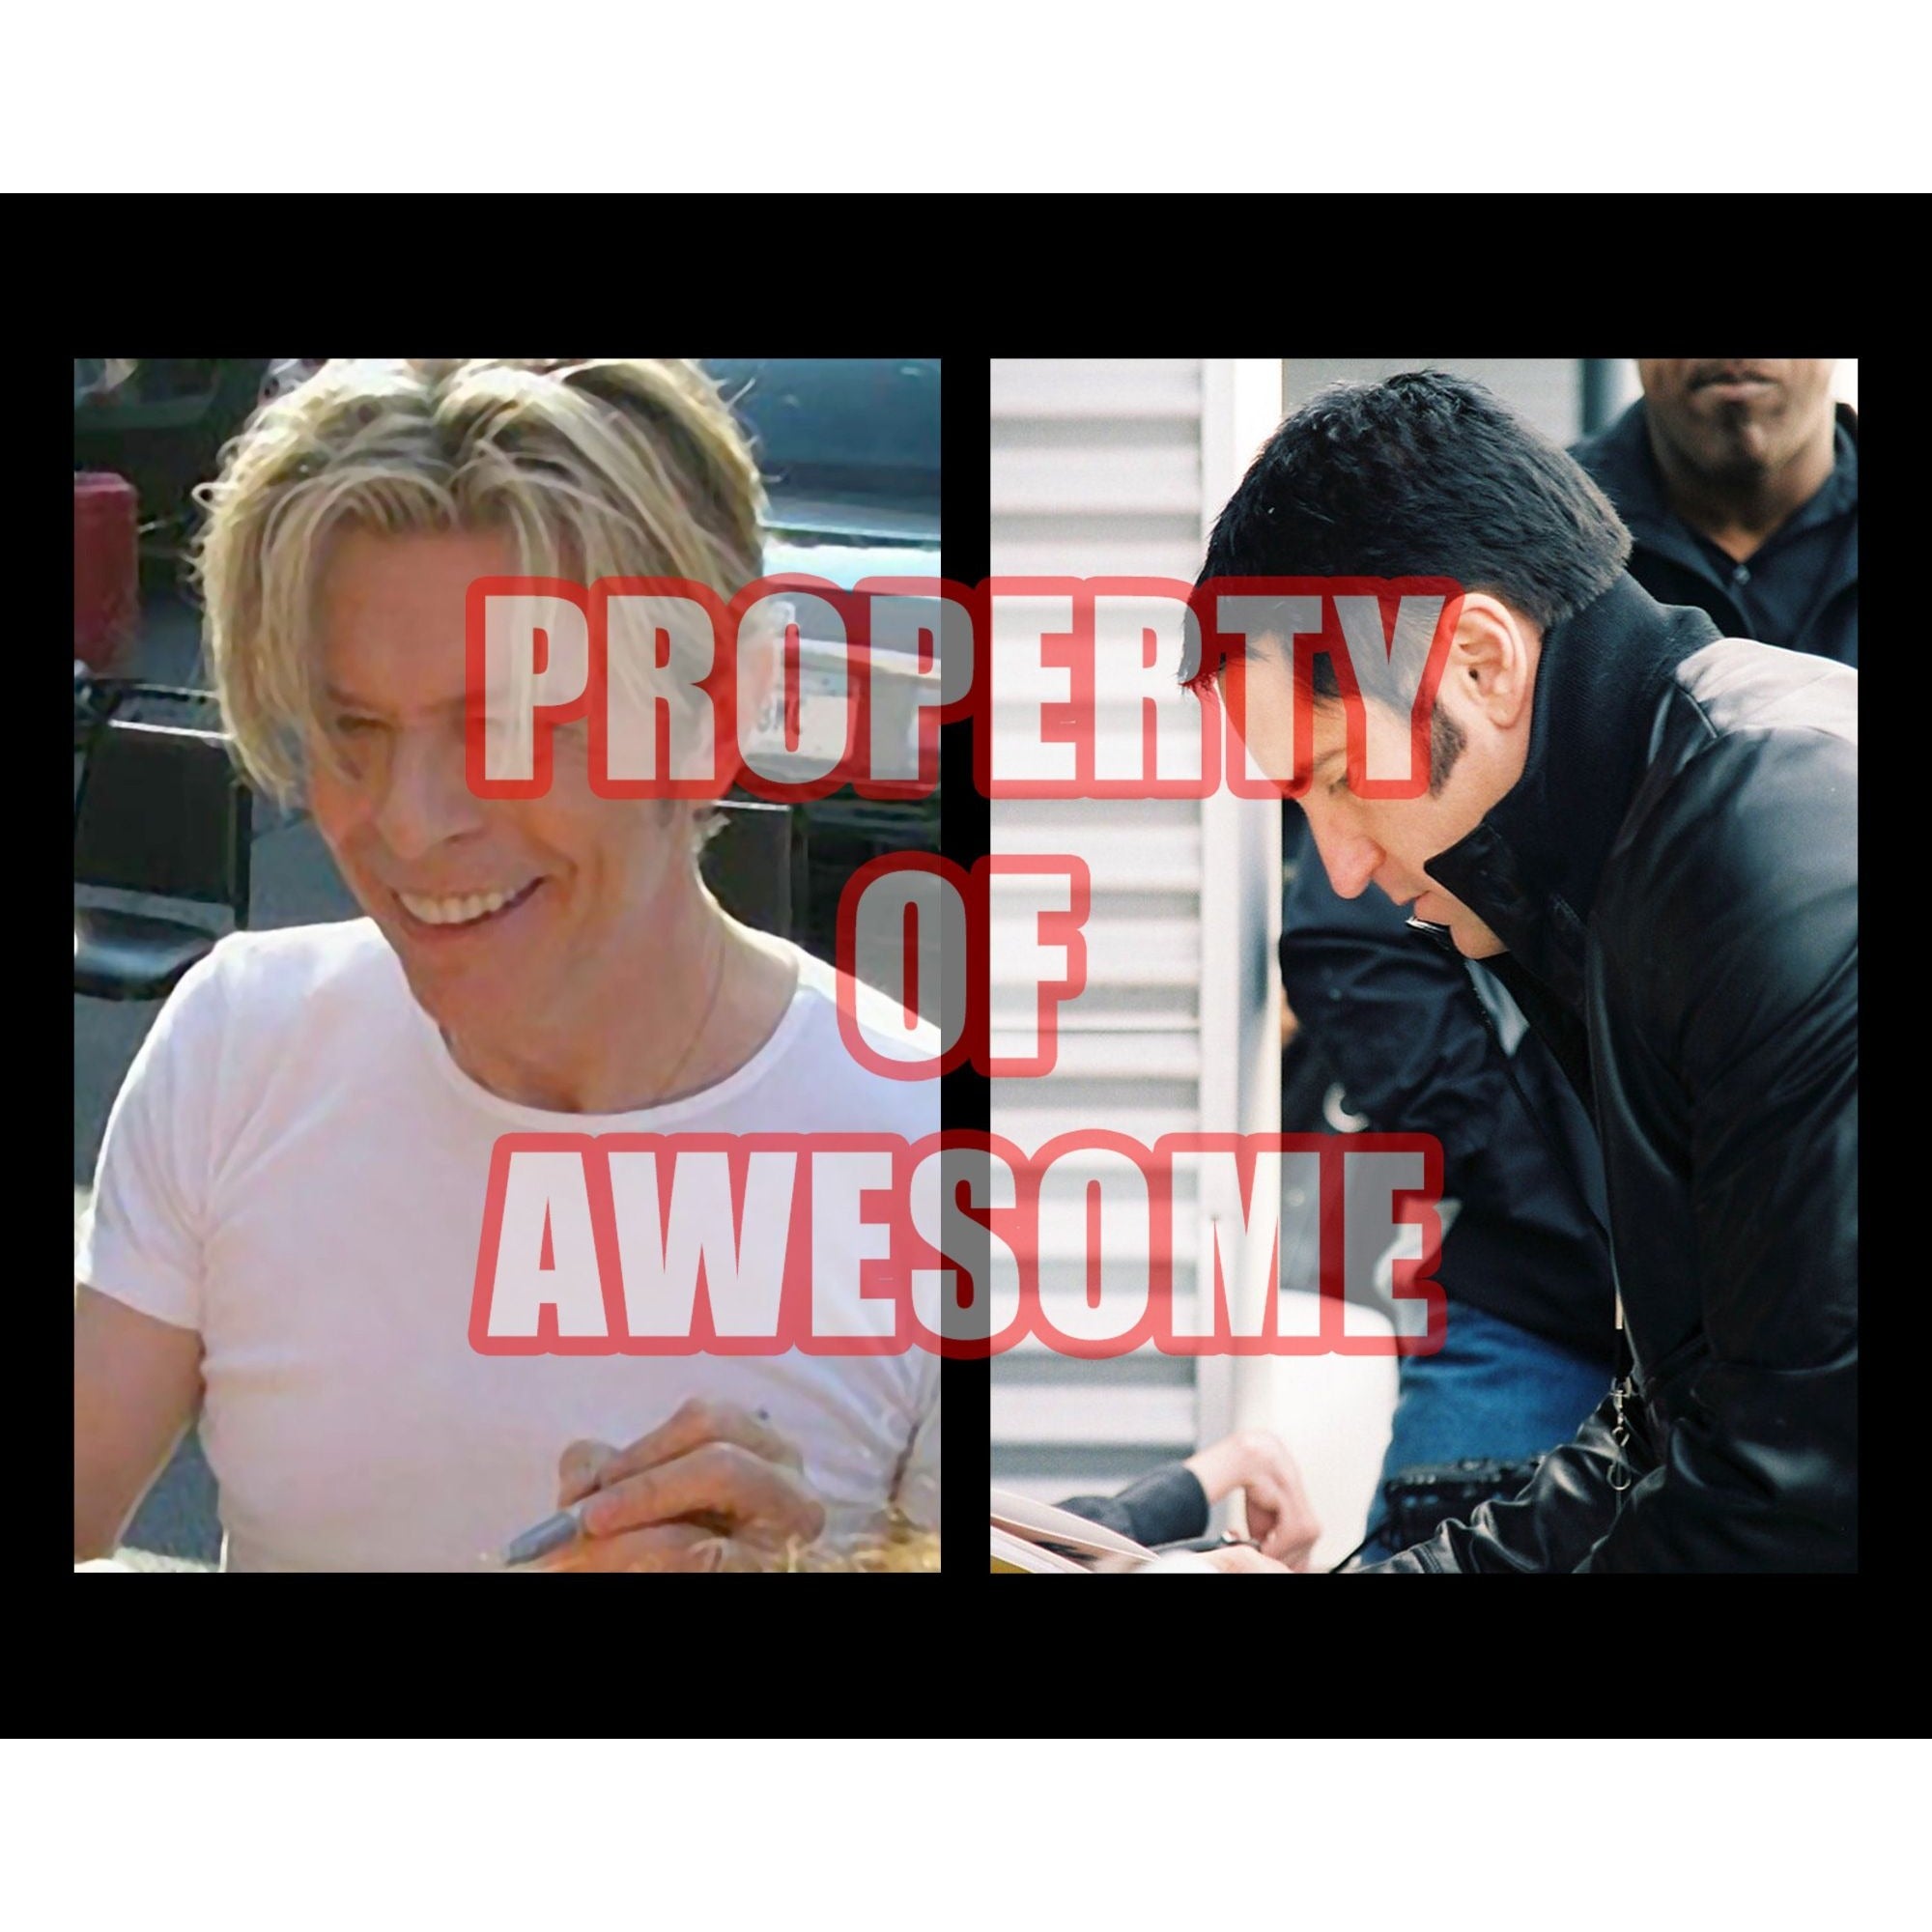 Trent Reznor and David Bowie 8 x 10 signed photo with proof